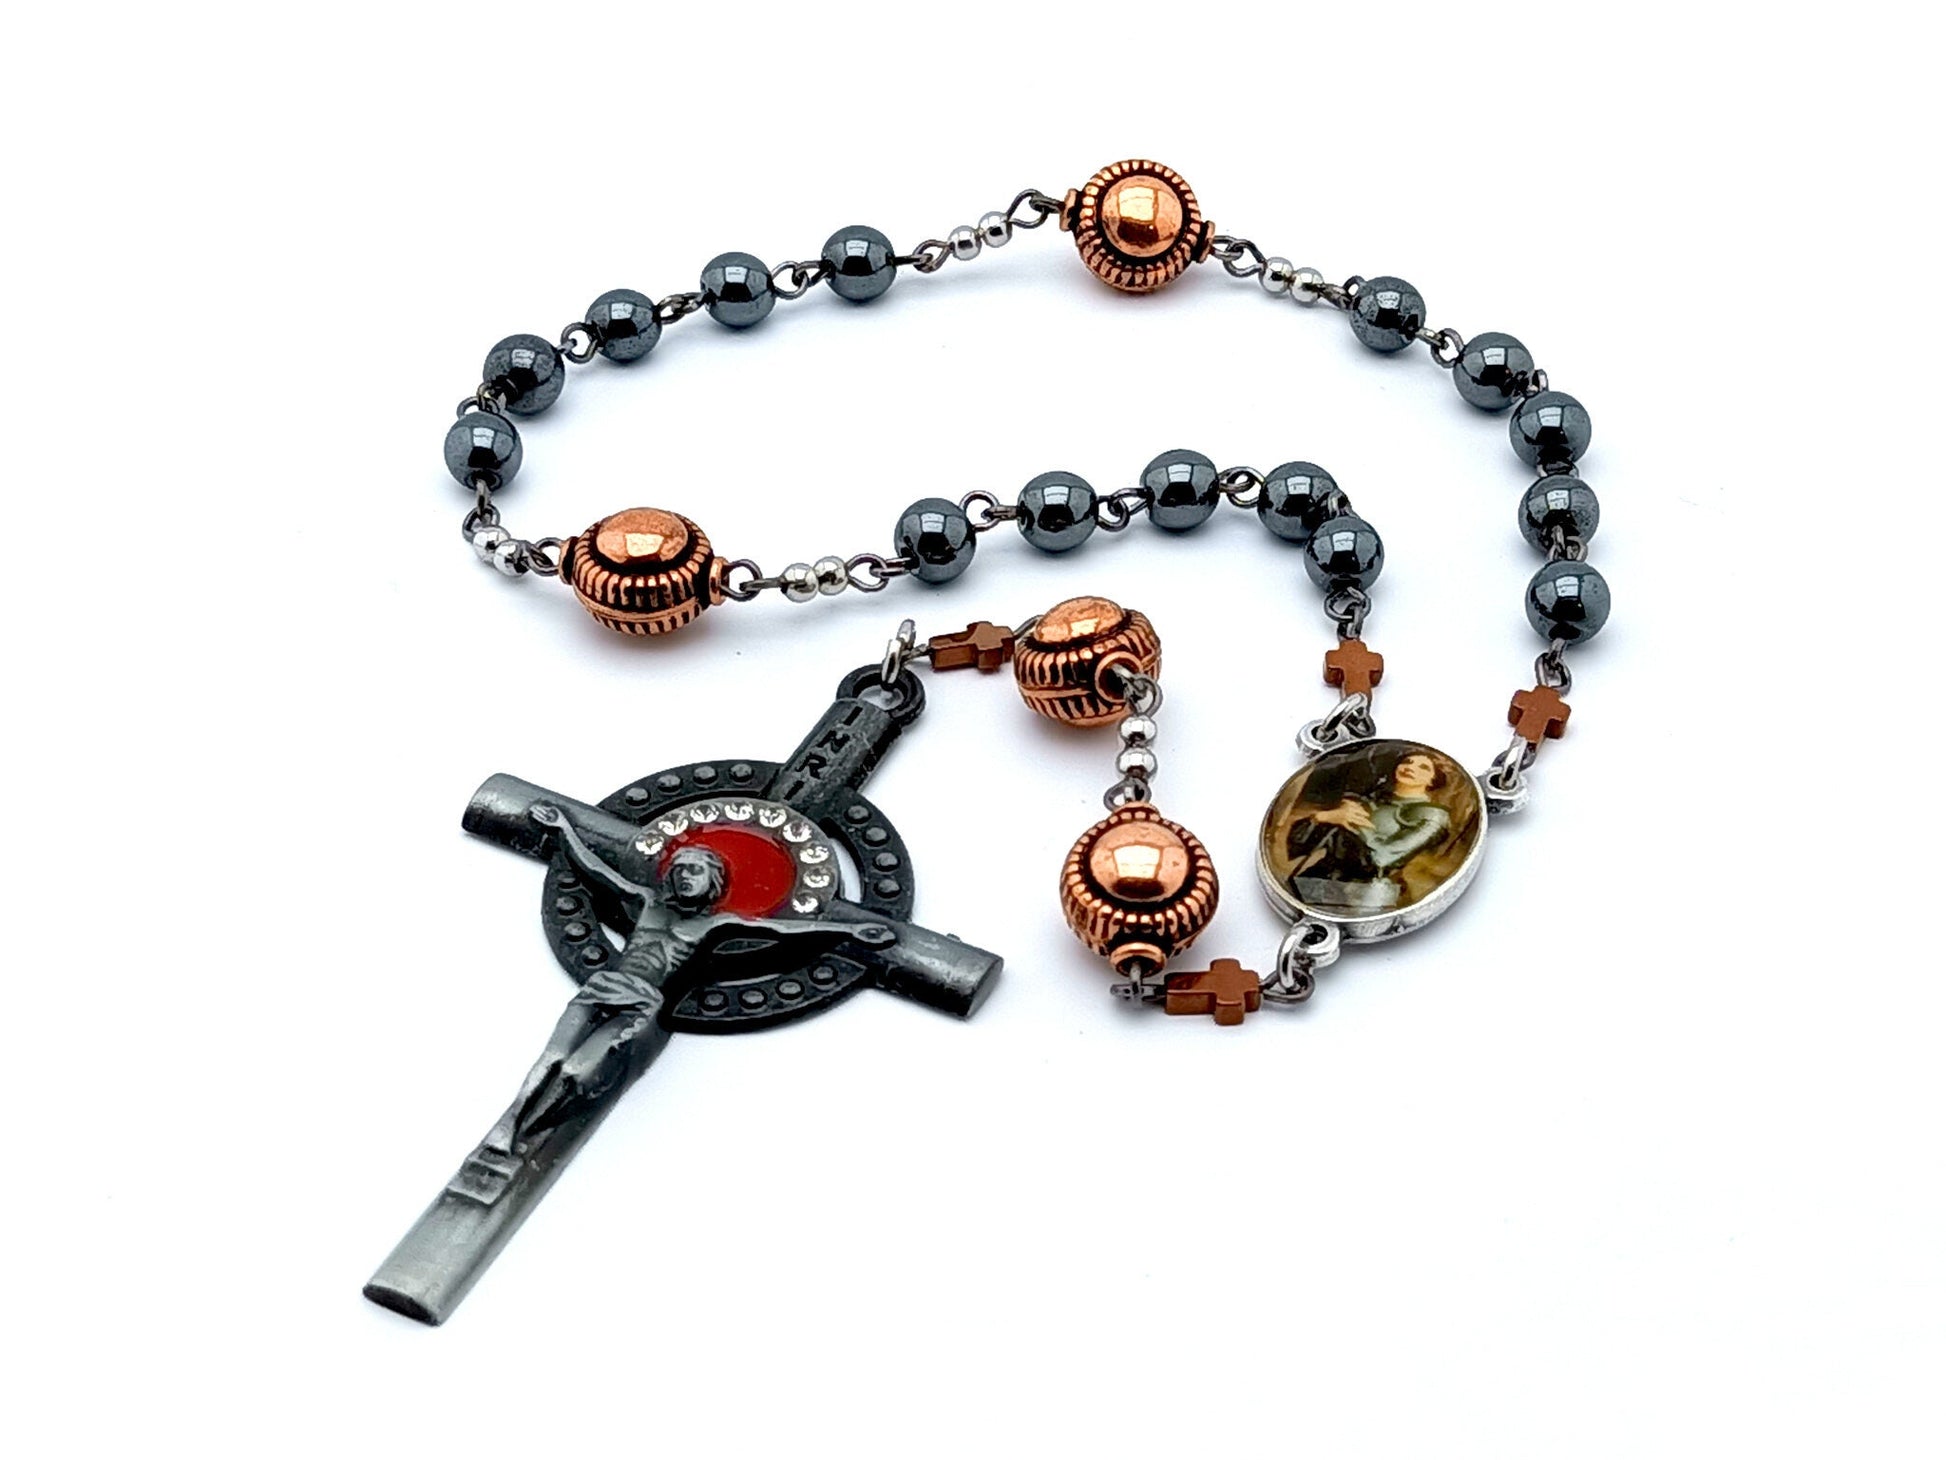 Saint Joan of Arc unique rosary beads prayer chaplet with gemstone and copper beads, pewter crucifix and picture centre medal.